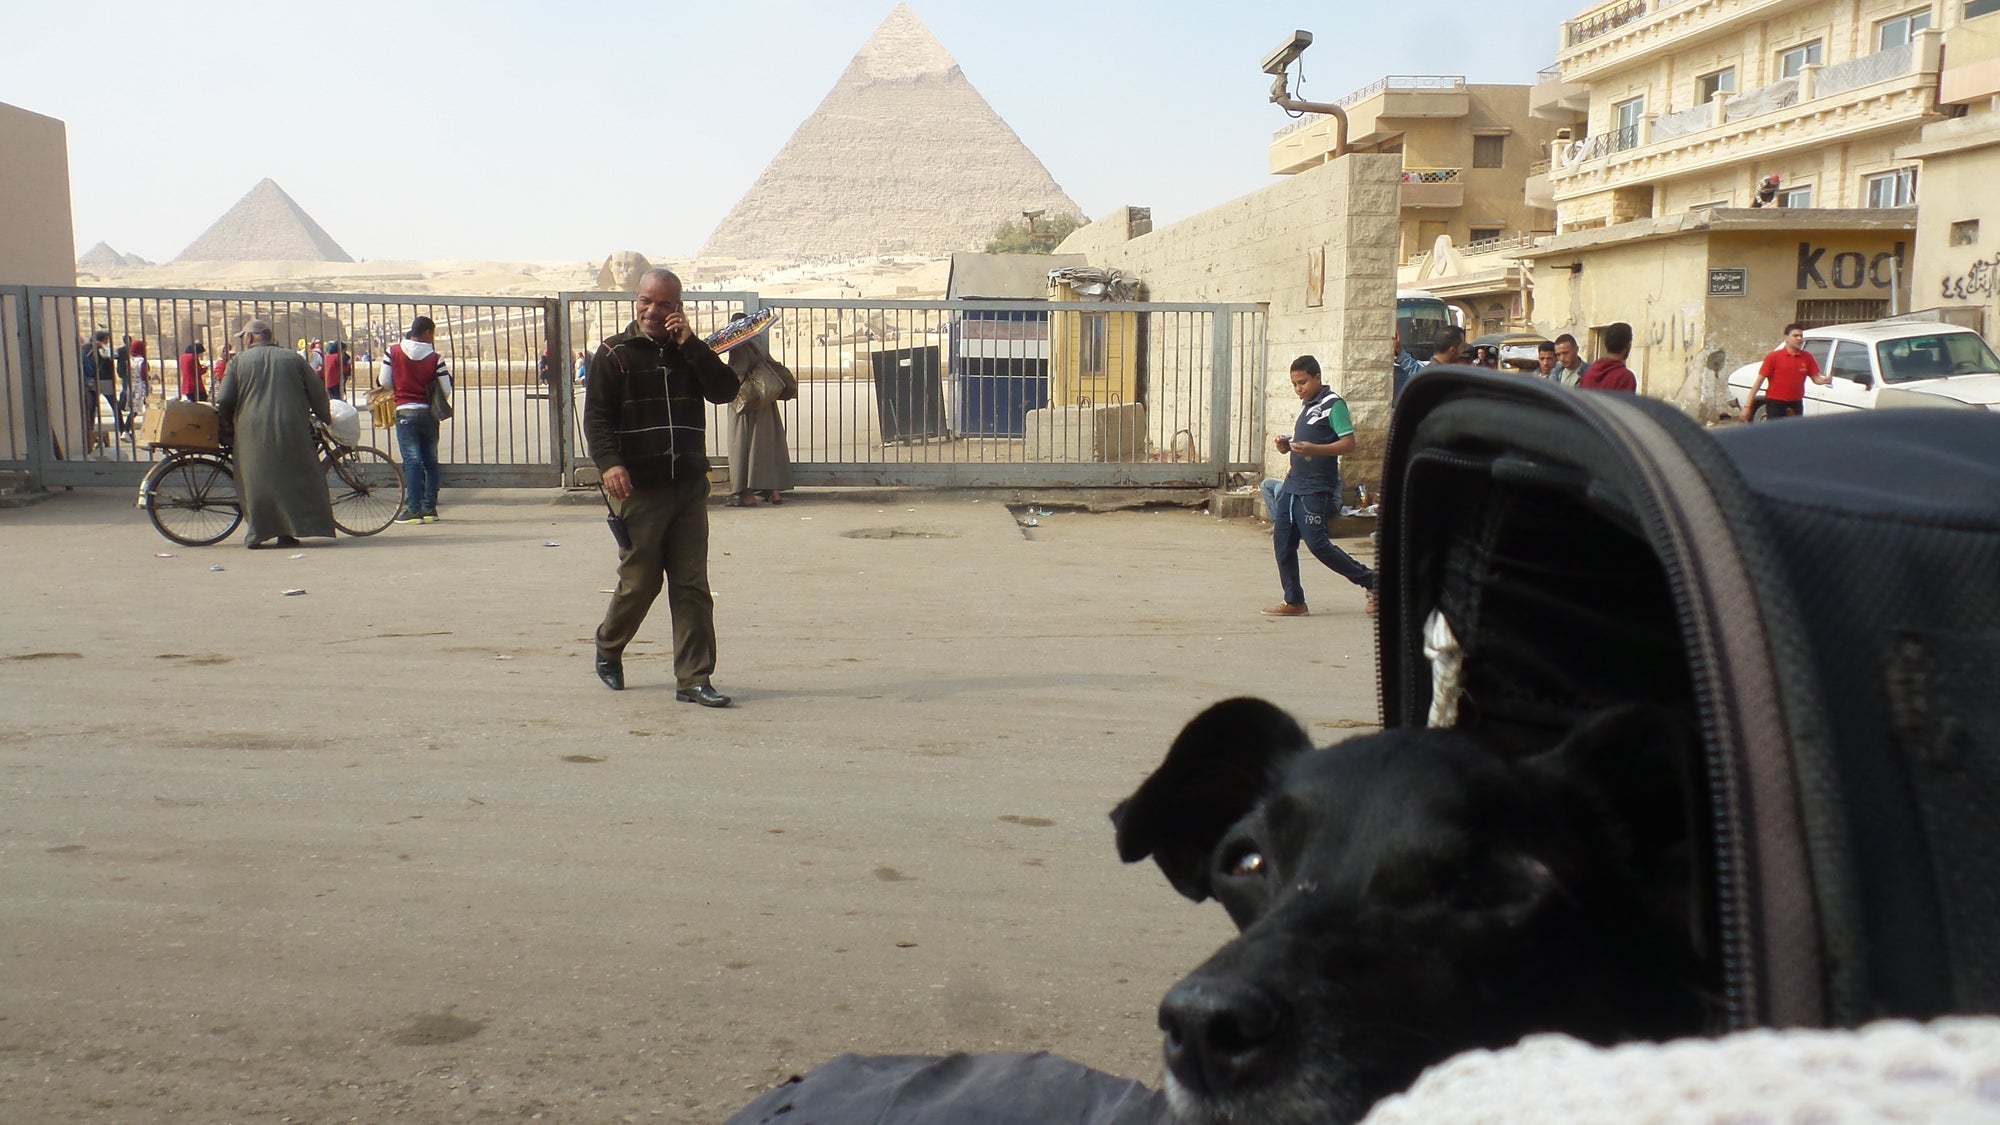 Pets are not allowed into the site of the Great Pyramid of Giza in Egypt so The Pack Track pulled up on the motorbikes site outside the perimeter fence for a look and a photo.